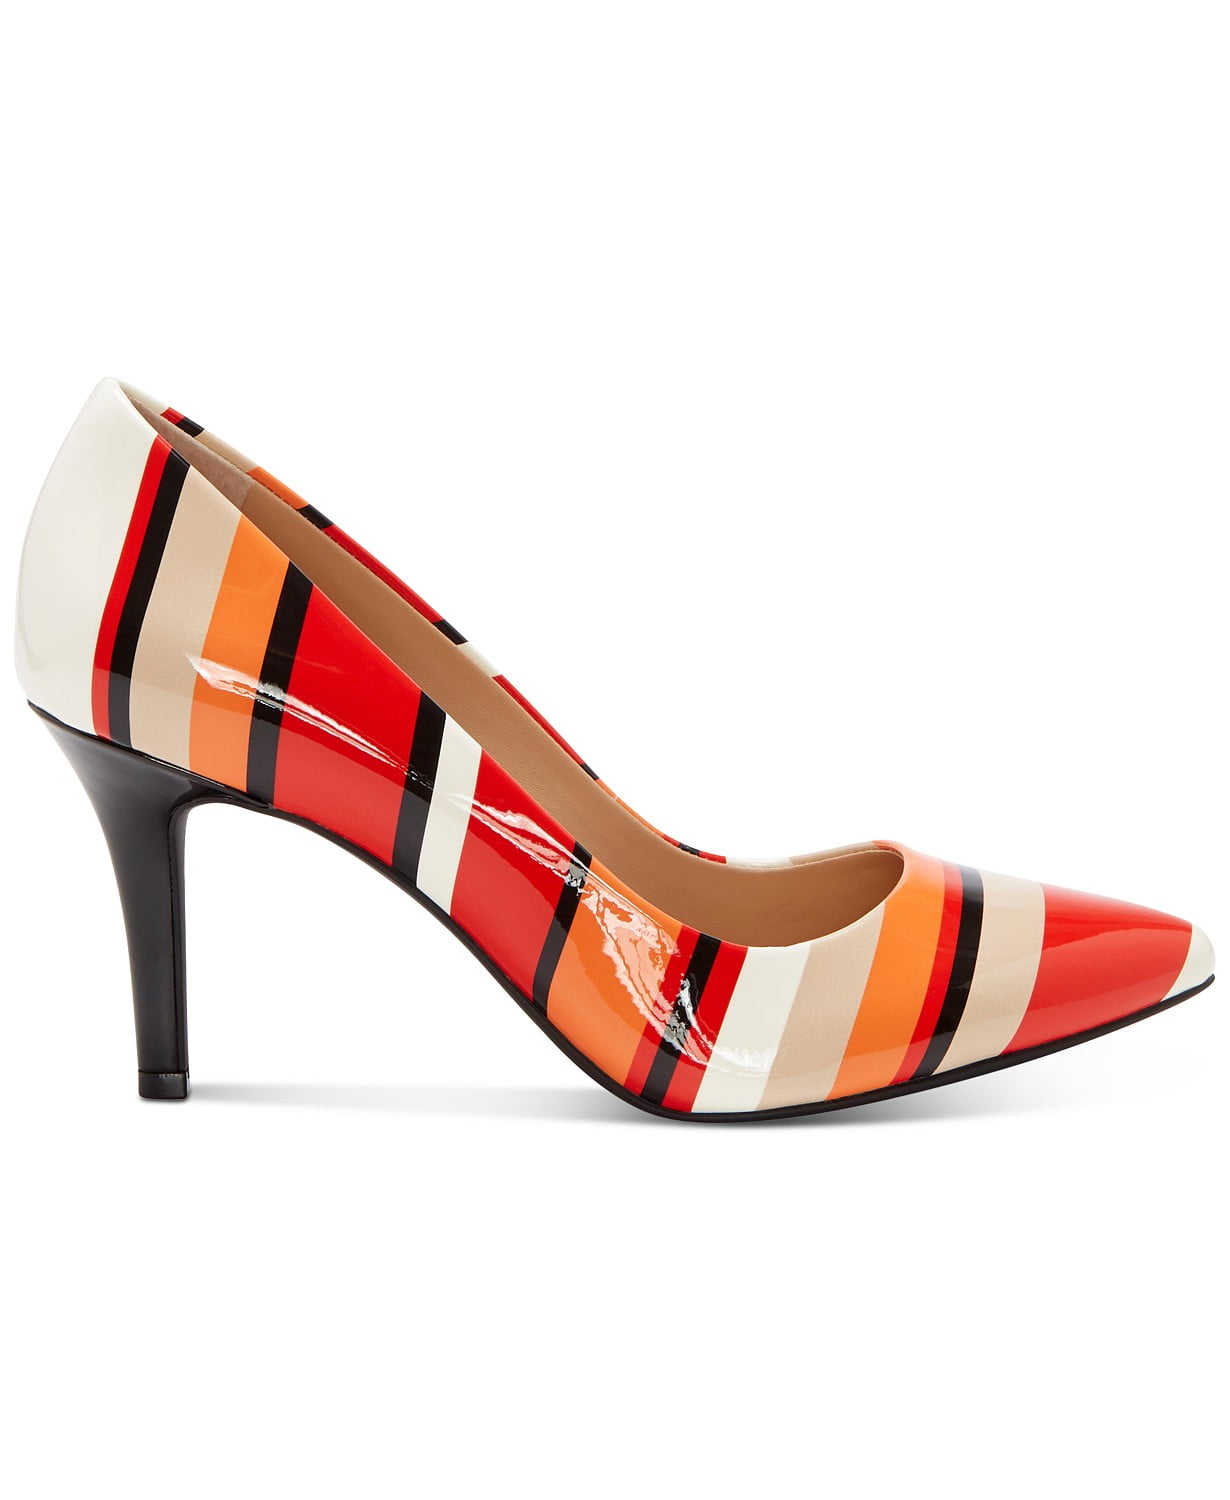 woocommerce-673321-2209615.cloudwaysapps.com-inc-international-concepts-womens-coral-zitah-pointed-toe-pumps